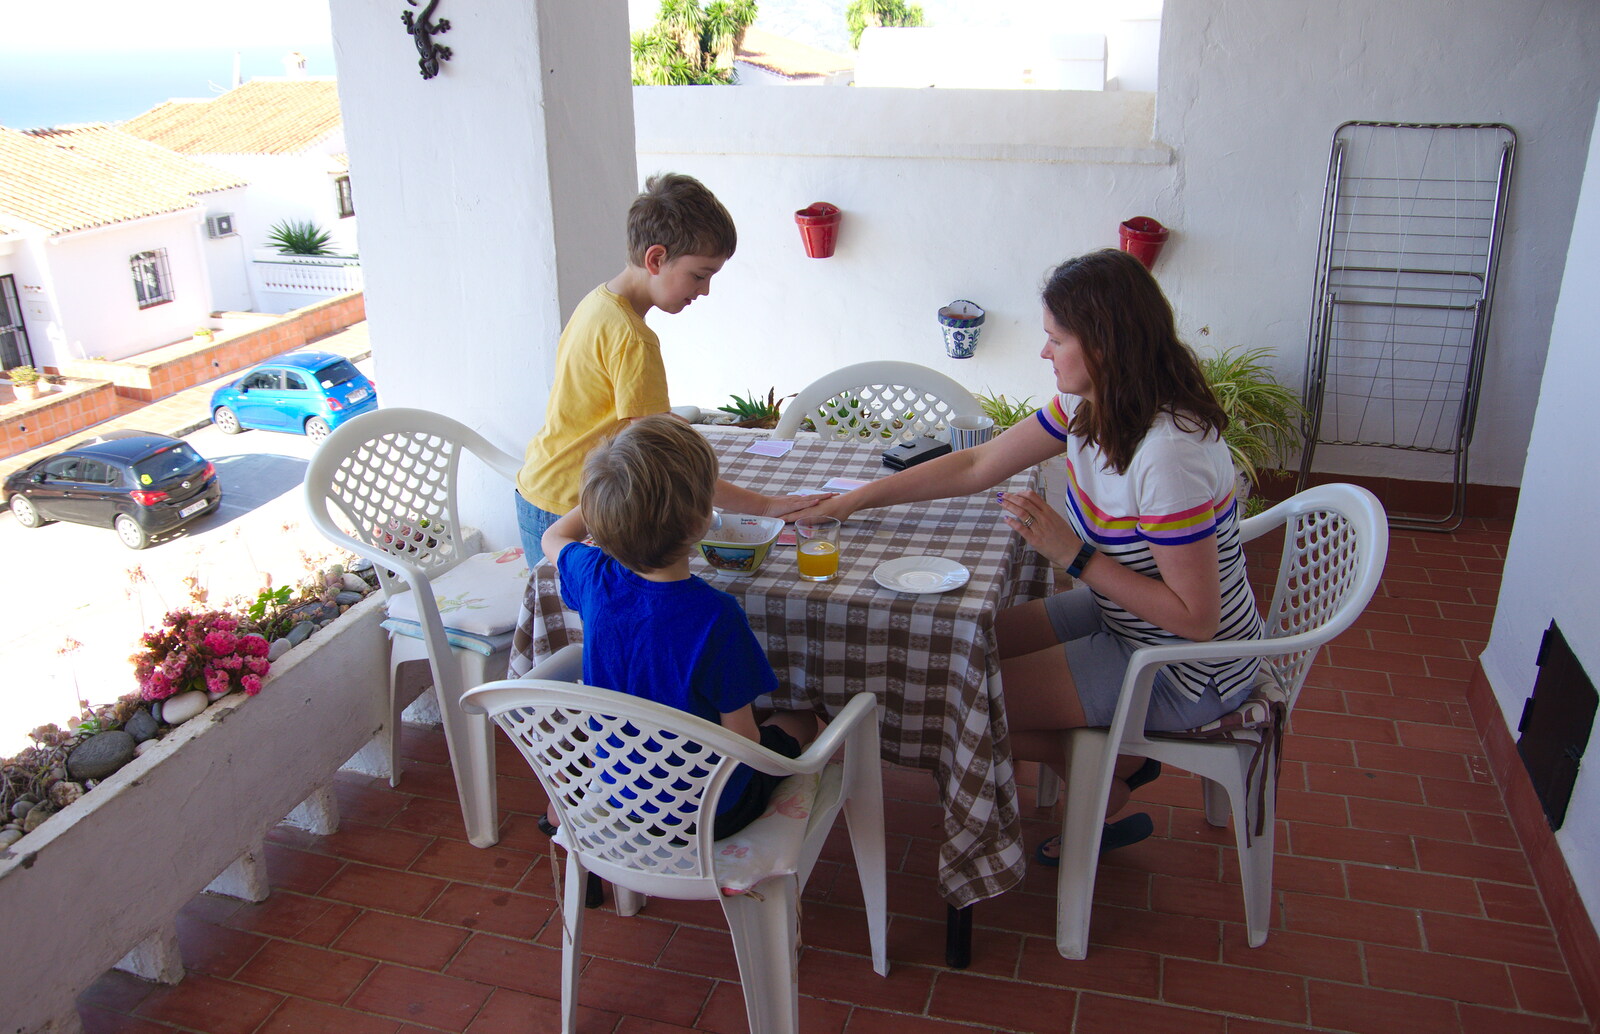 We play cards on the terrace from A Holiday in Nerja, Andalusia, Spain - 15th April 2019